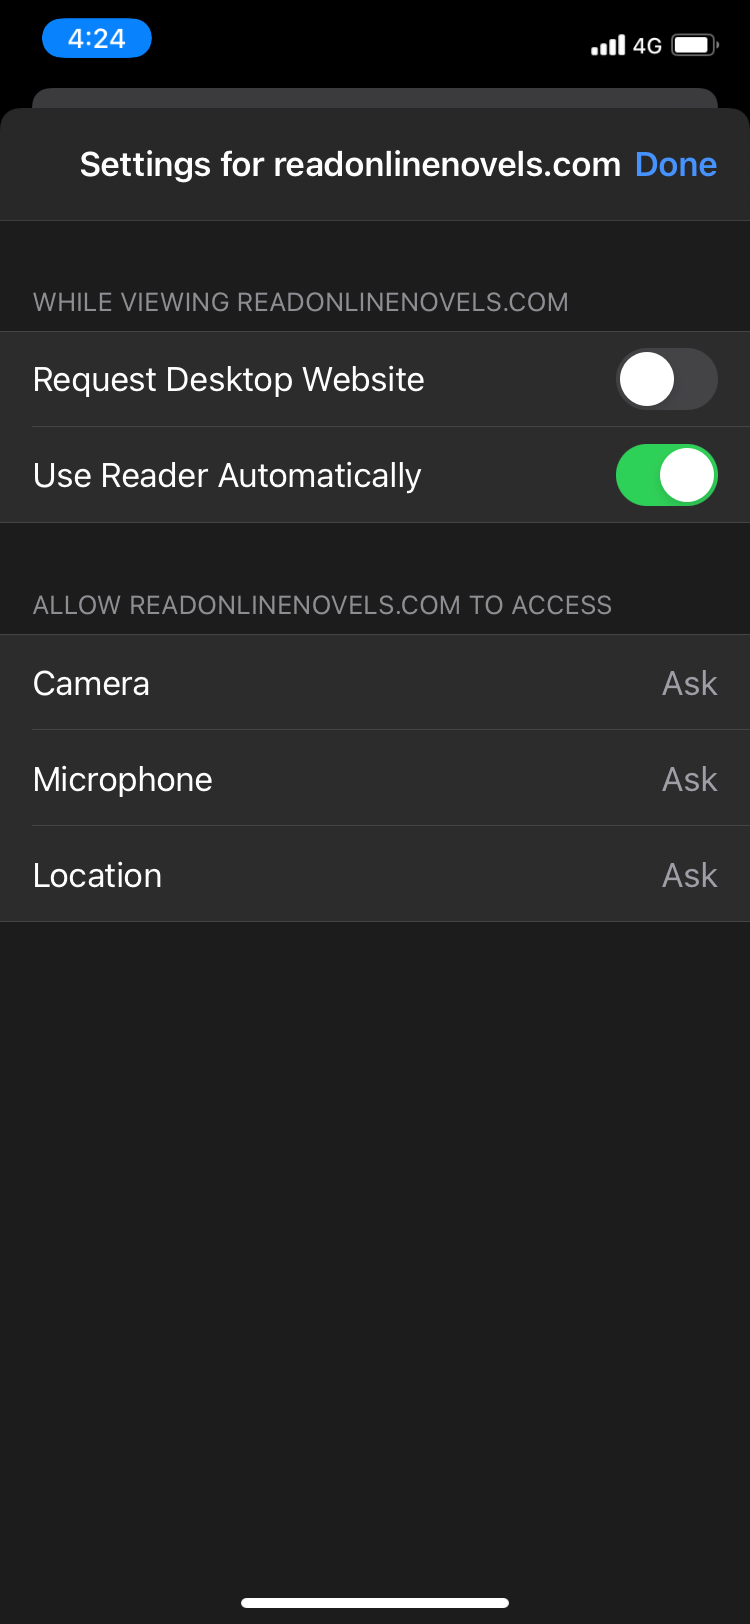 use reader view automatically